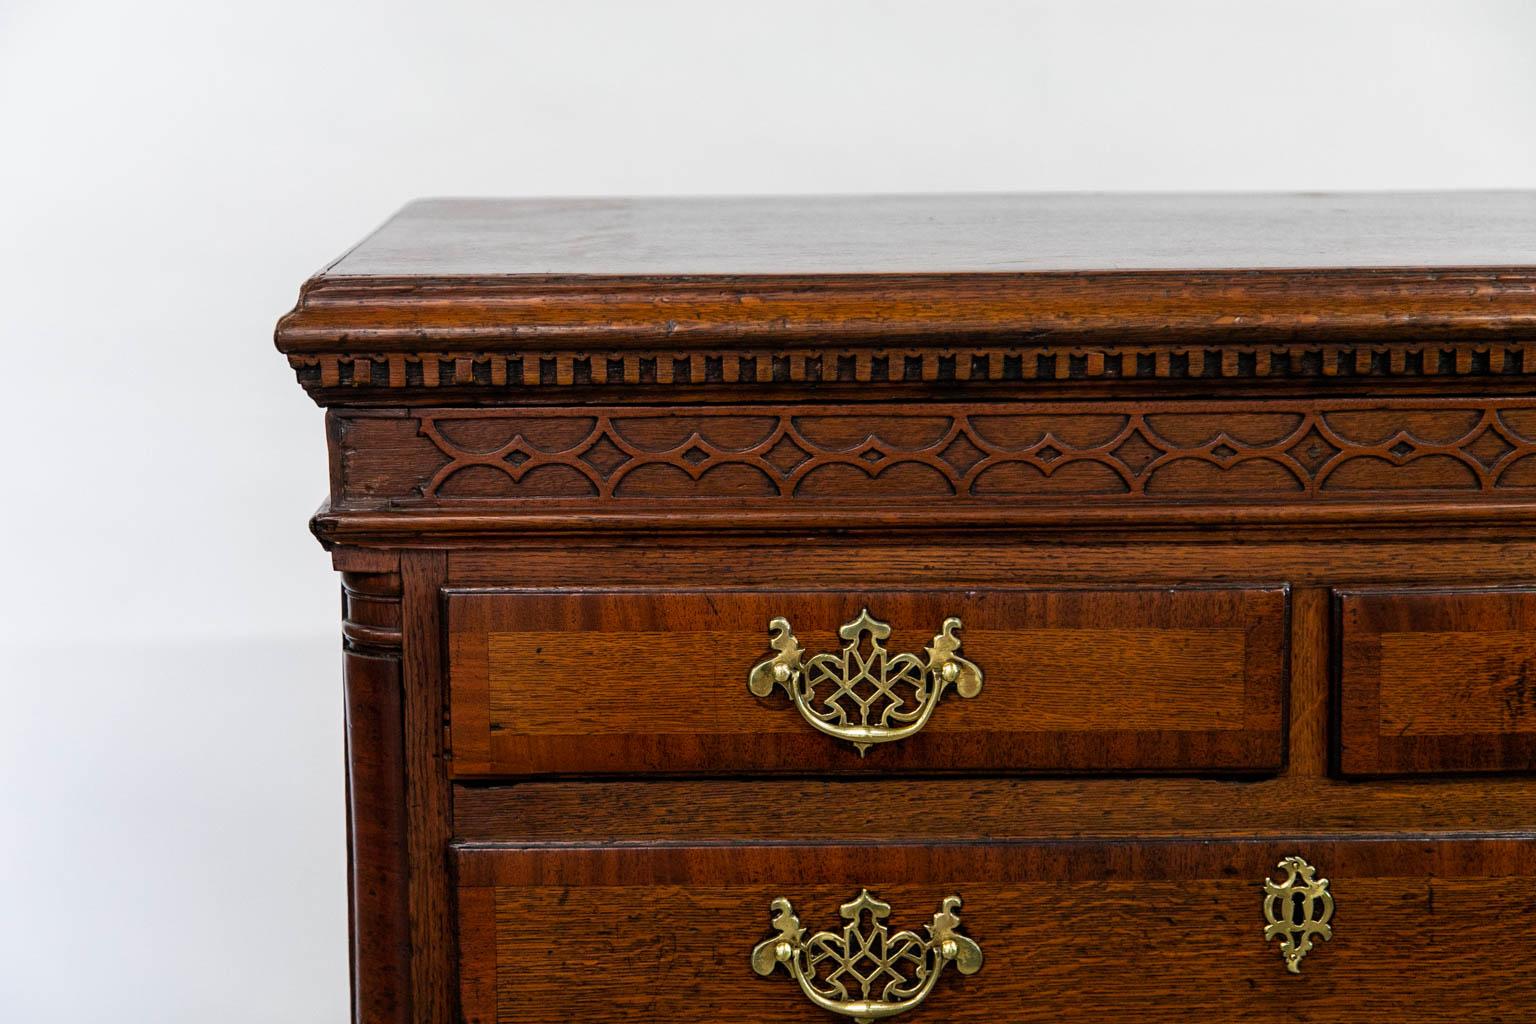 This chest is crossbanded with a mahogany banded on the top and all drawer fronts. The top has heavy ogee molding skirtd with egg and dentil moilding on all three sides. The frieze has a repeating blind fretwork large and small diamond pattern which